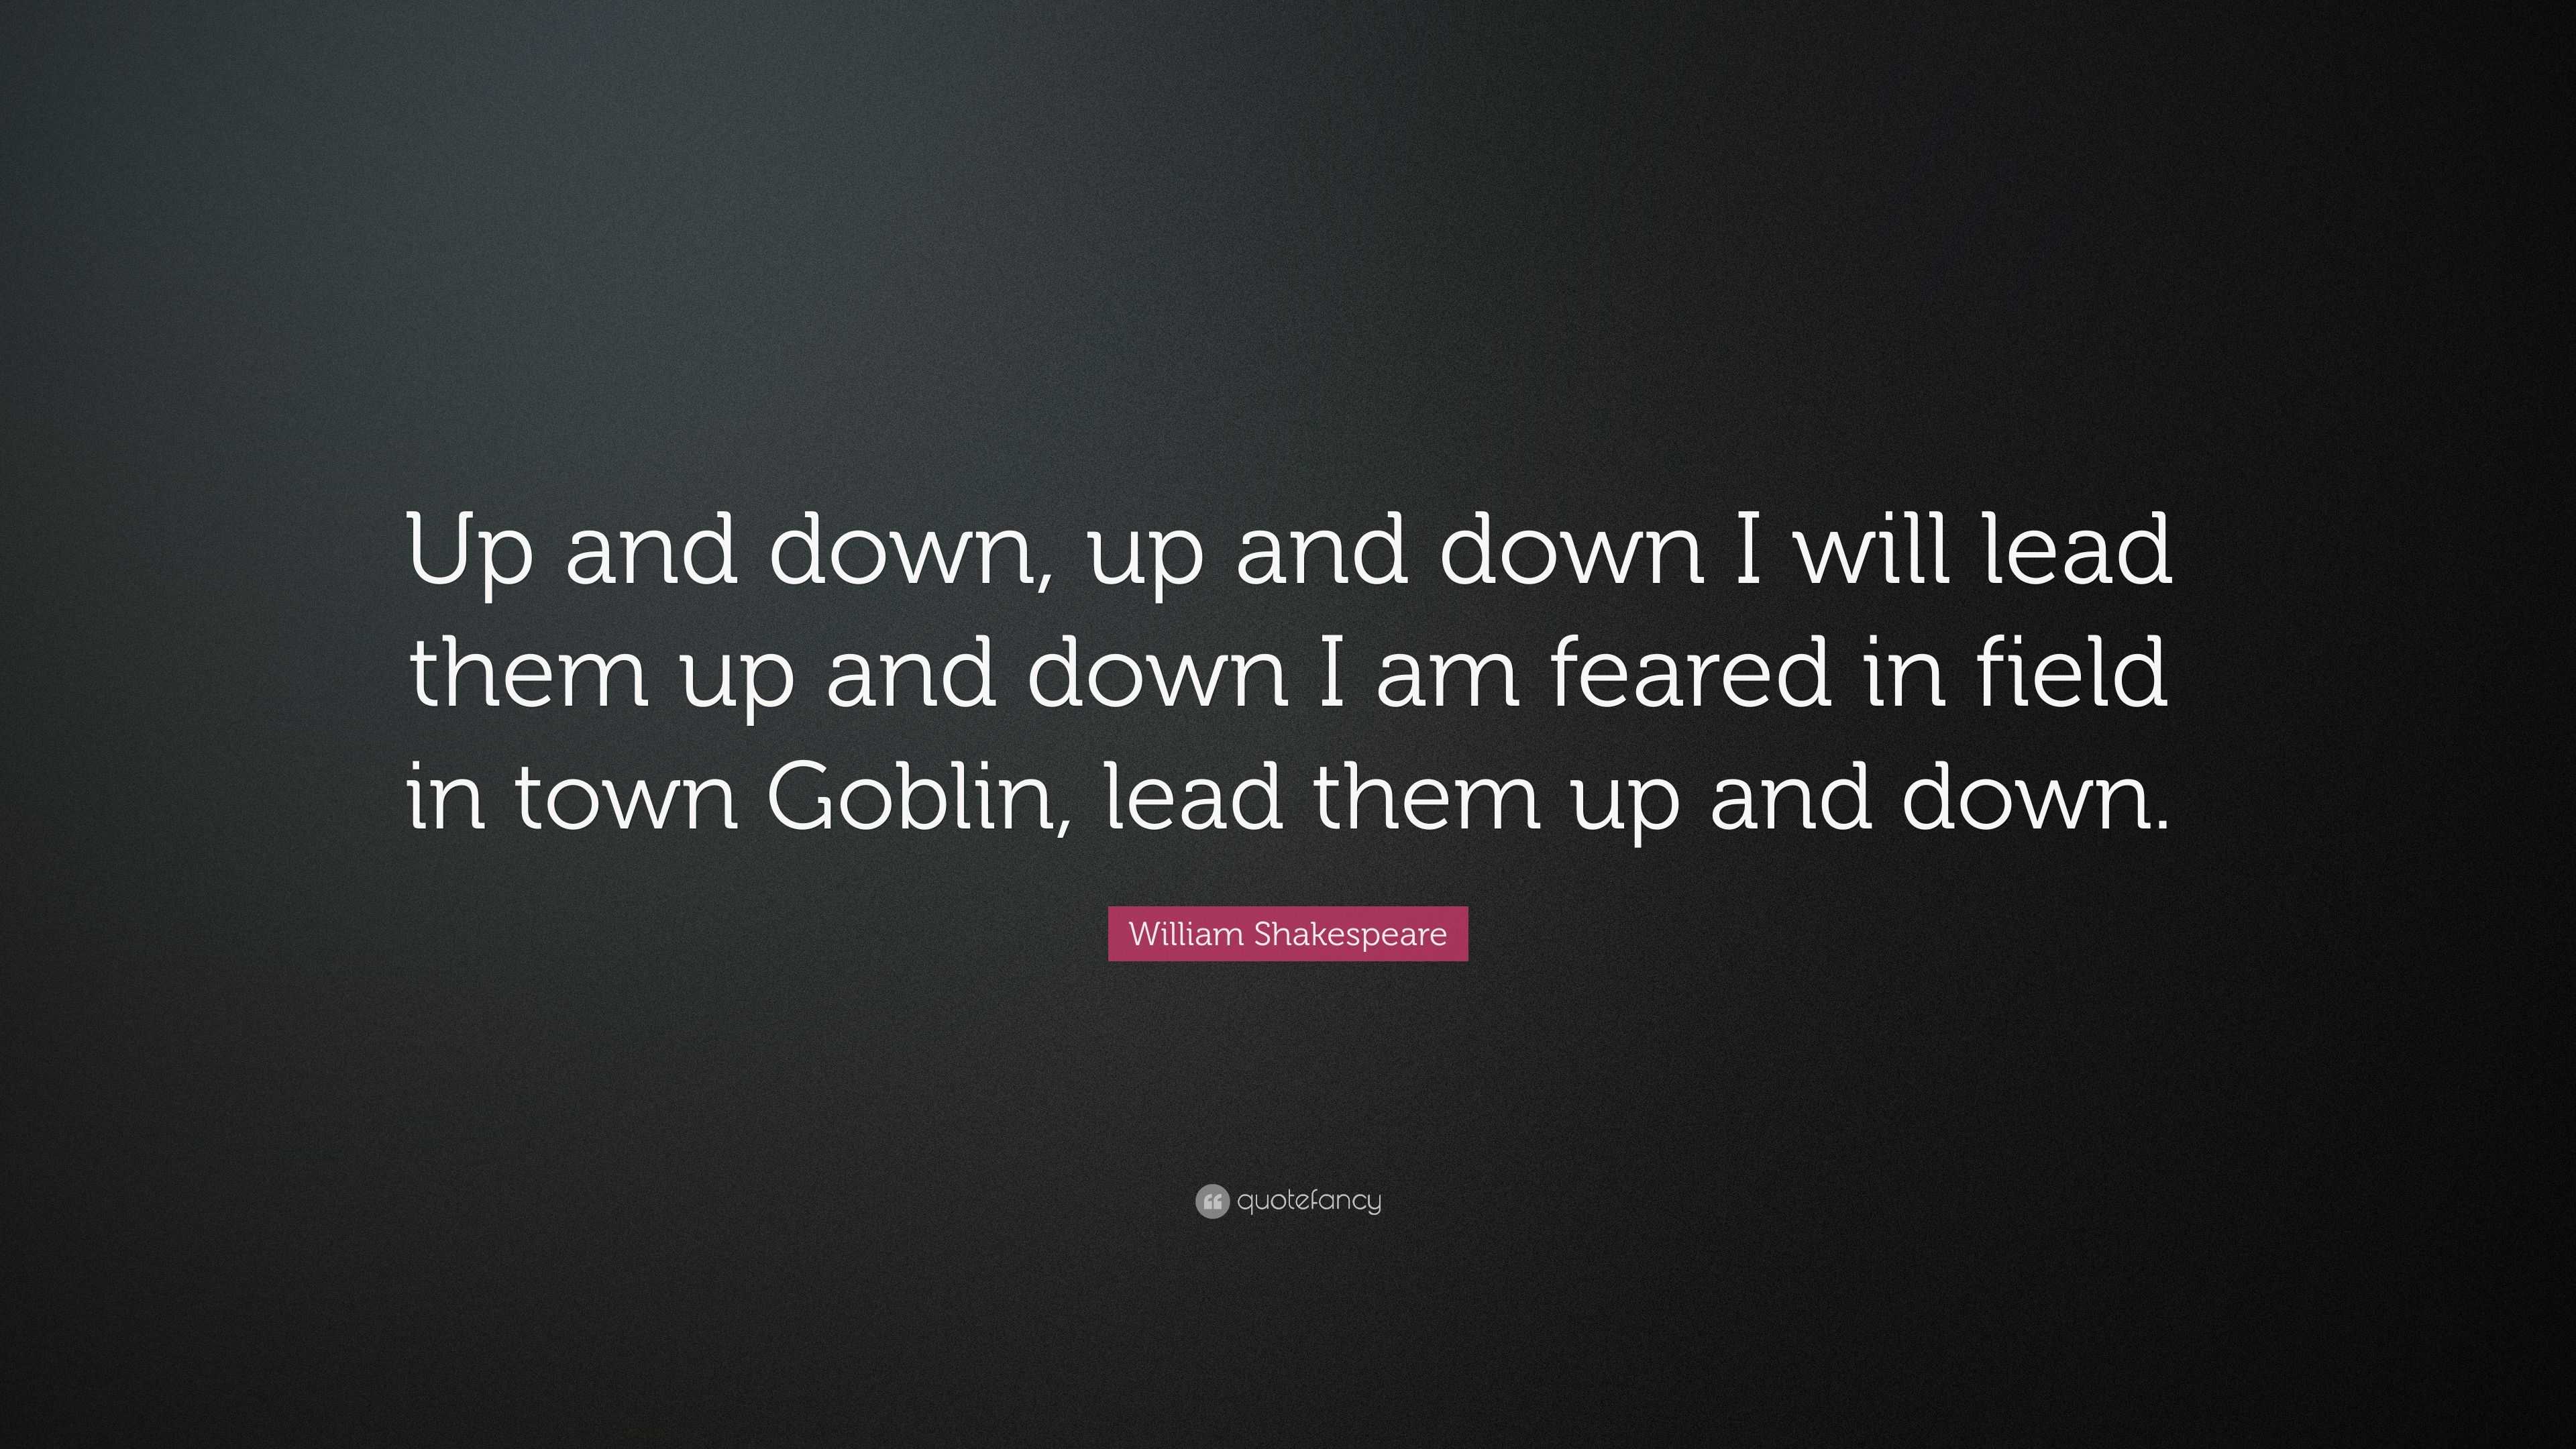 William Shakespeare Quote “Up and down, up and down I